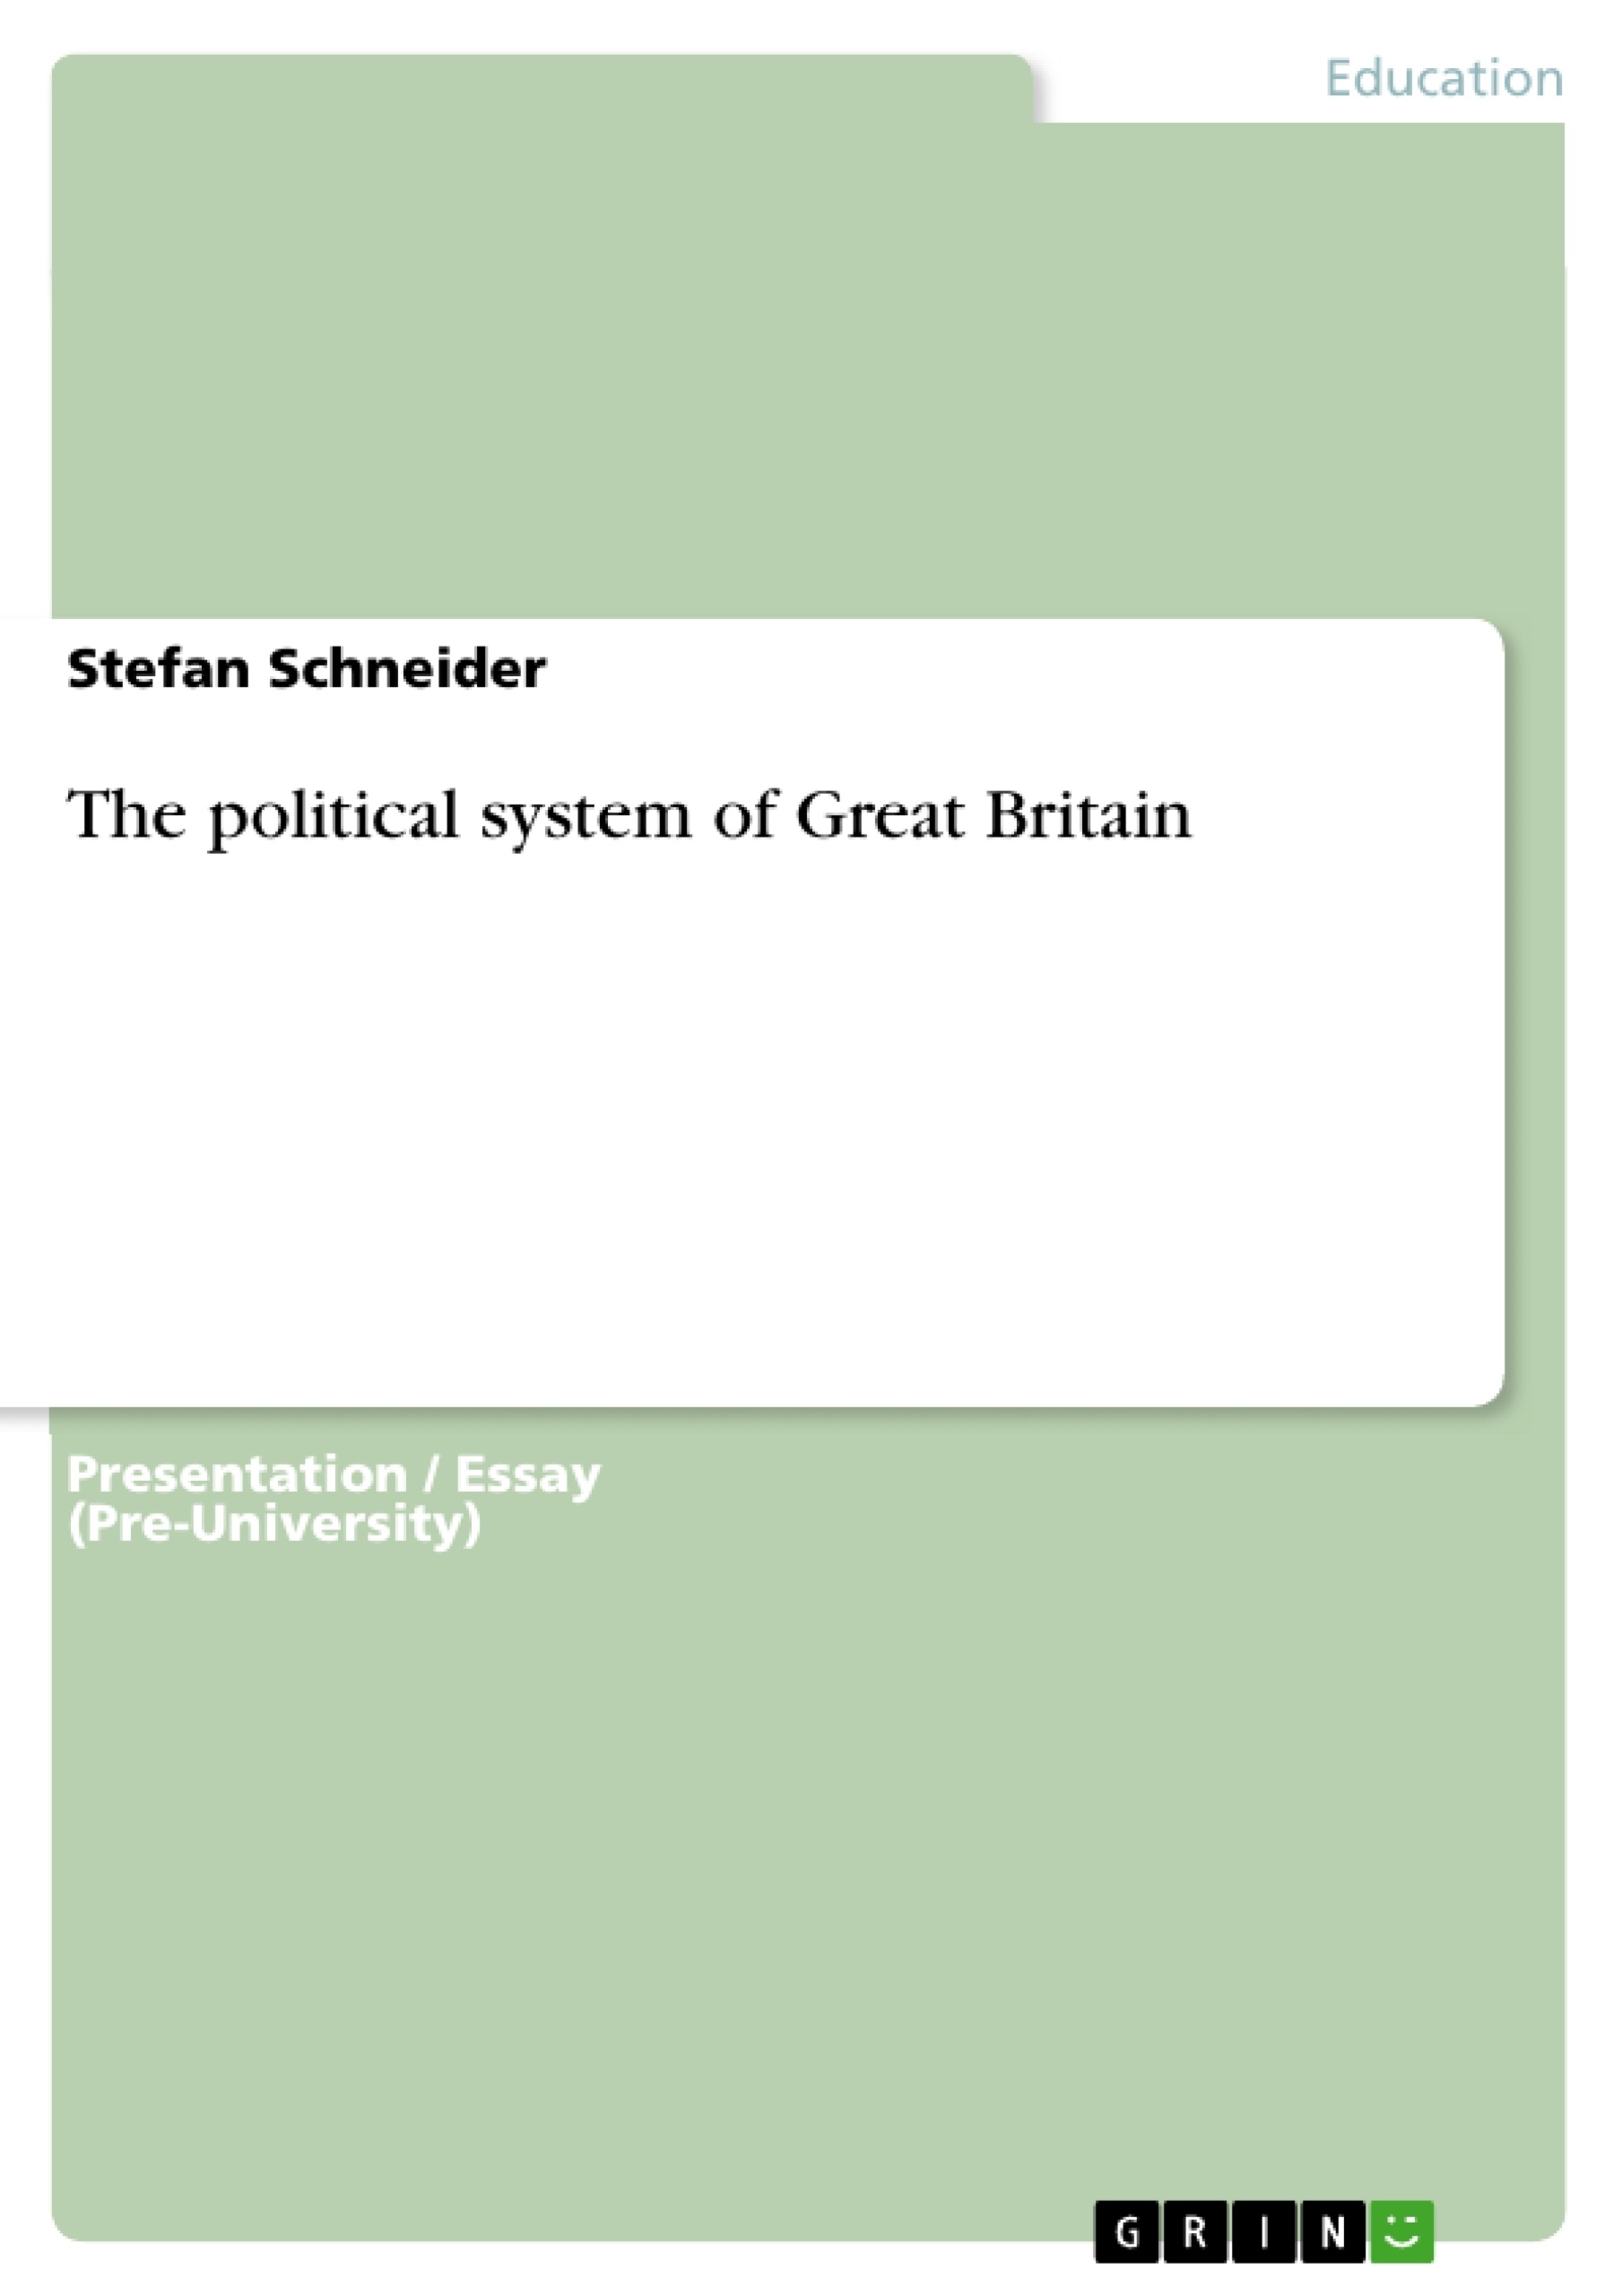 Реферат: Government Essay Research Paper The political system